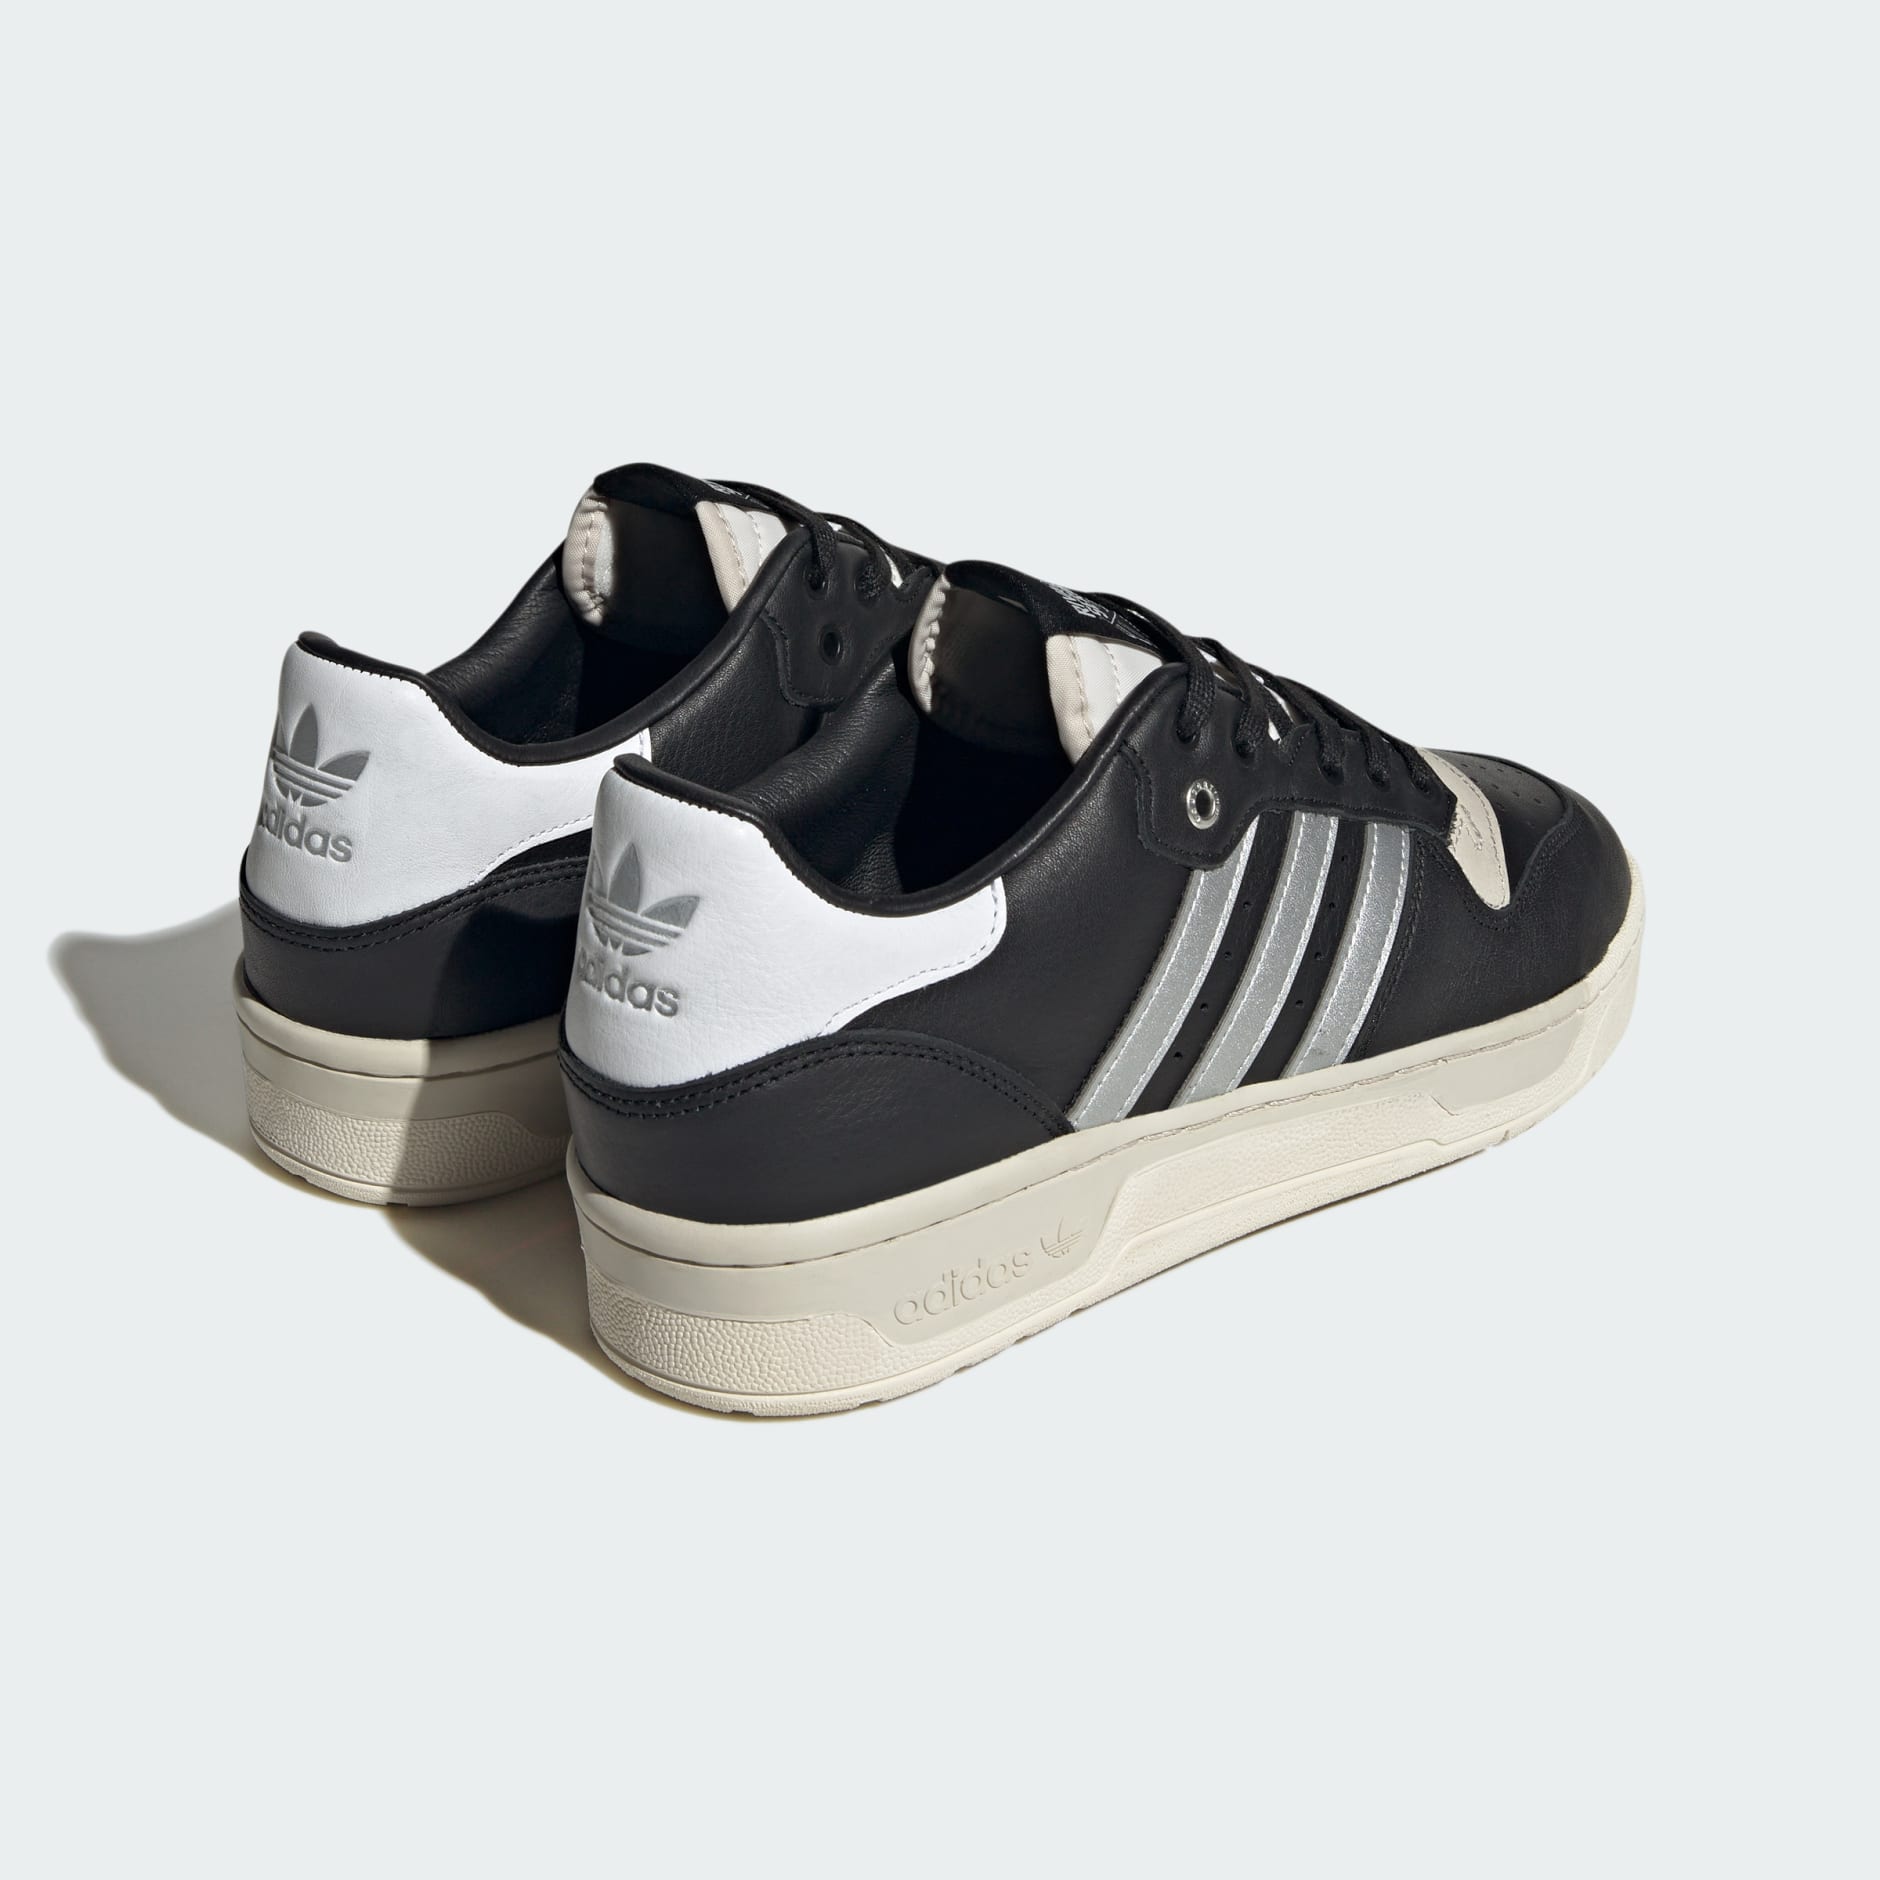 Shoes - Rivalry Low Consortium Shoes - Black | adidas South Africa